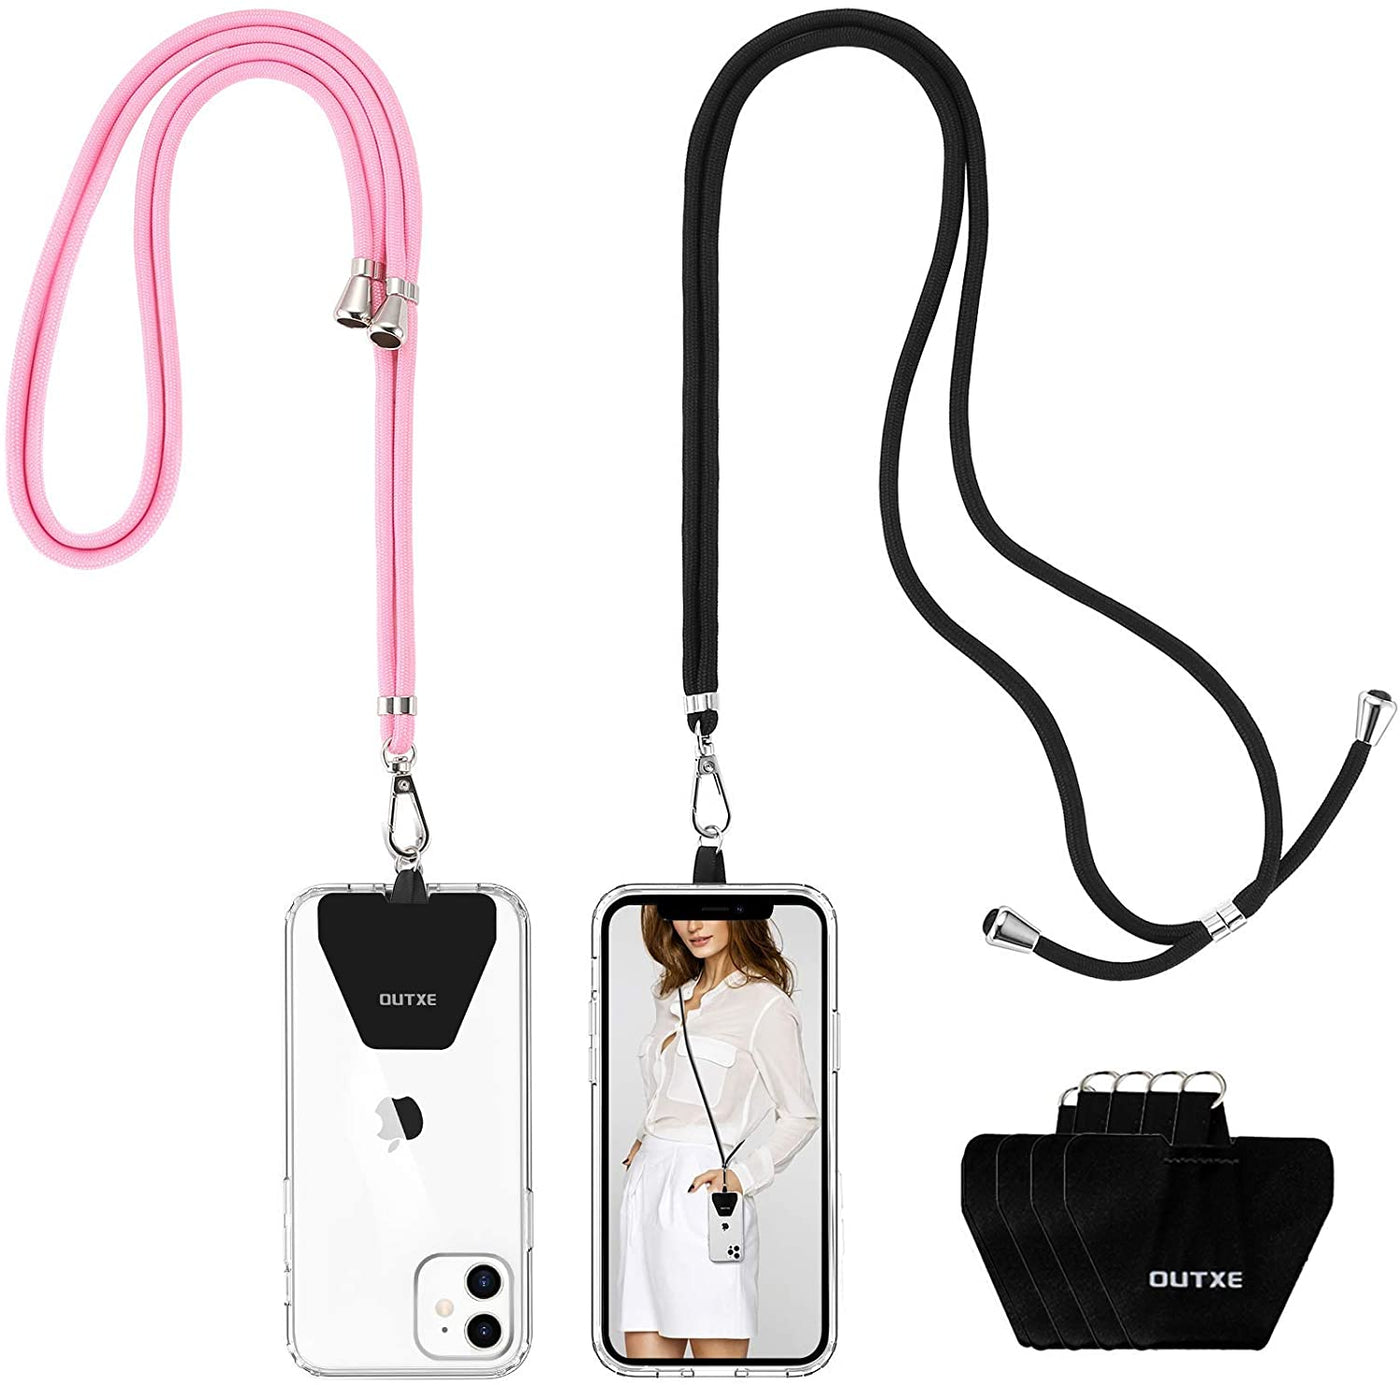 OUTXE Adjustable Phone Lanyards 2 * Neck Lanyards and 4 * Pads